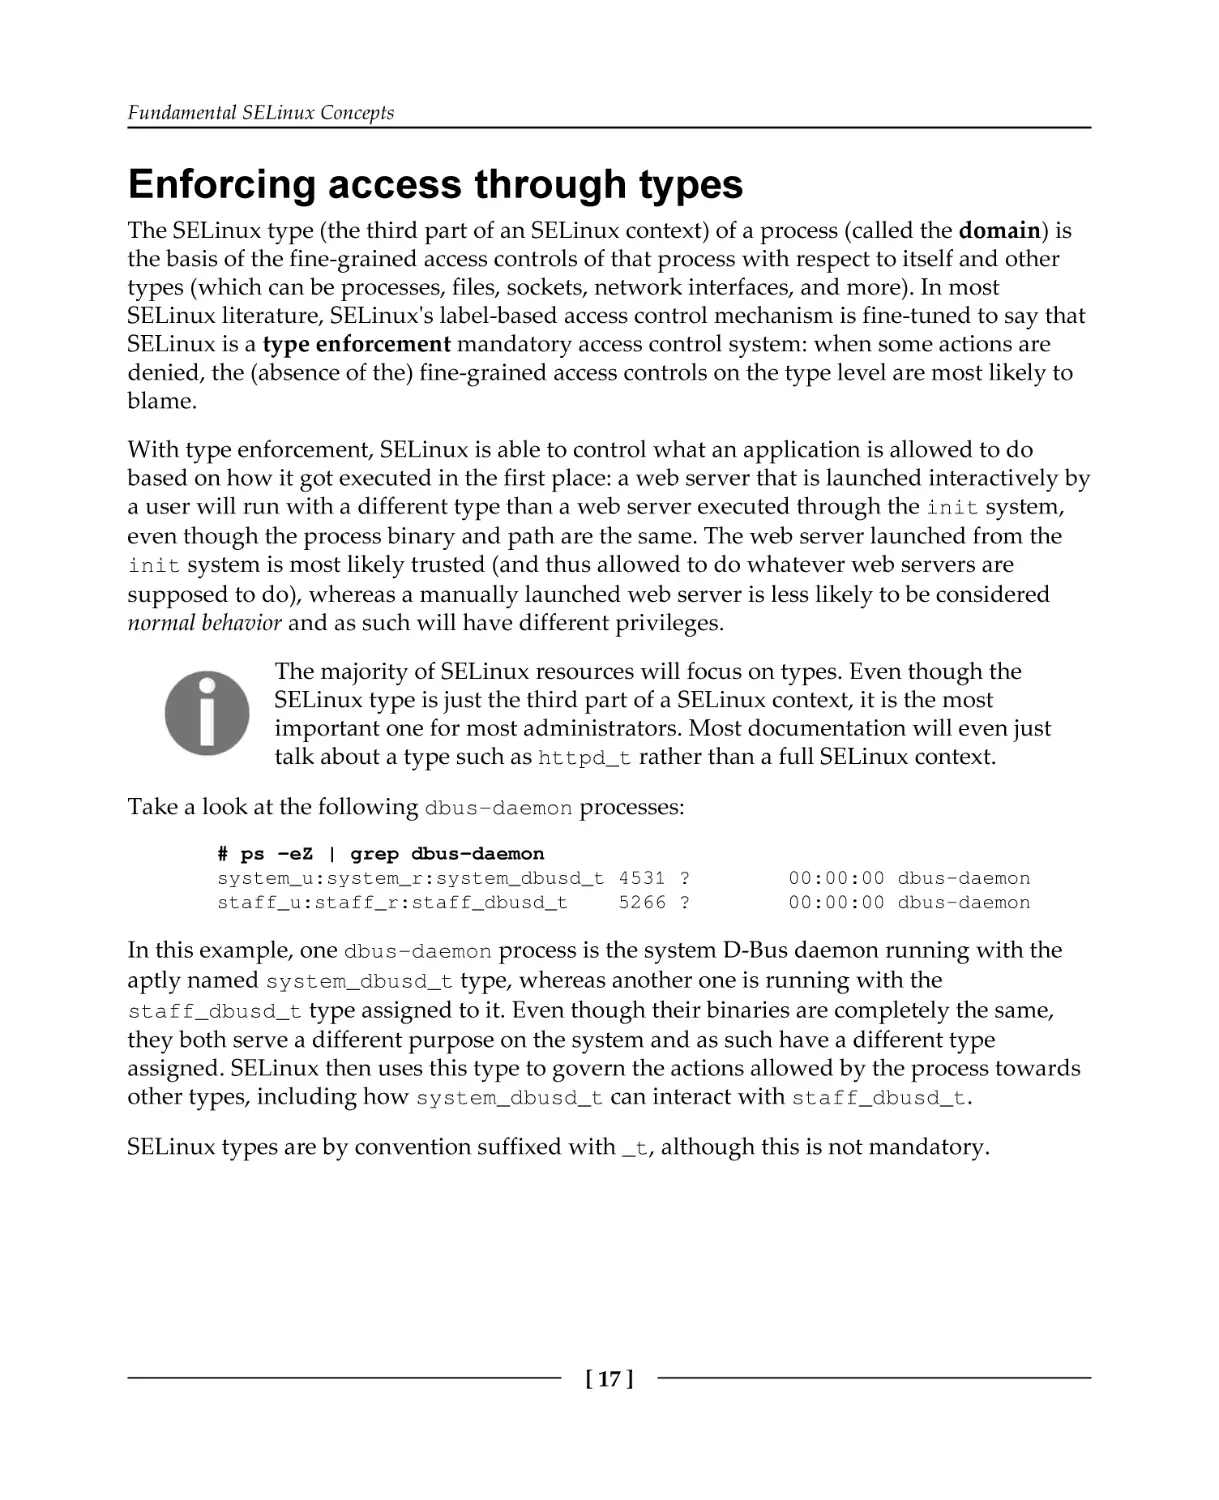 Enforcing access through types